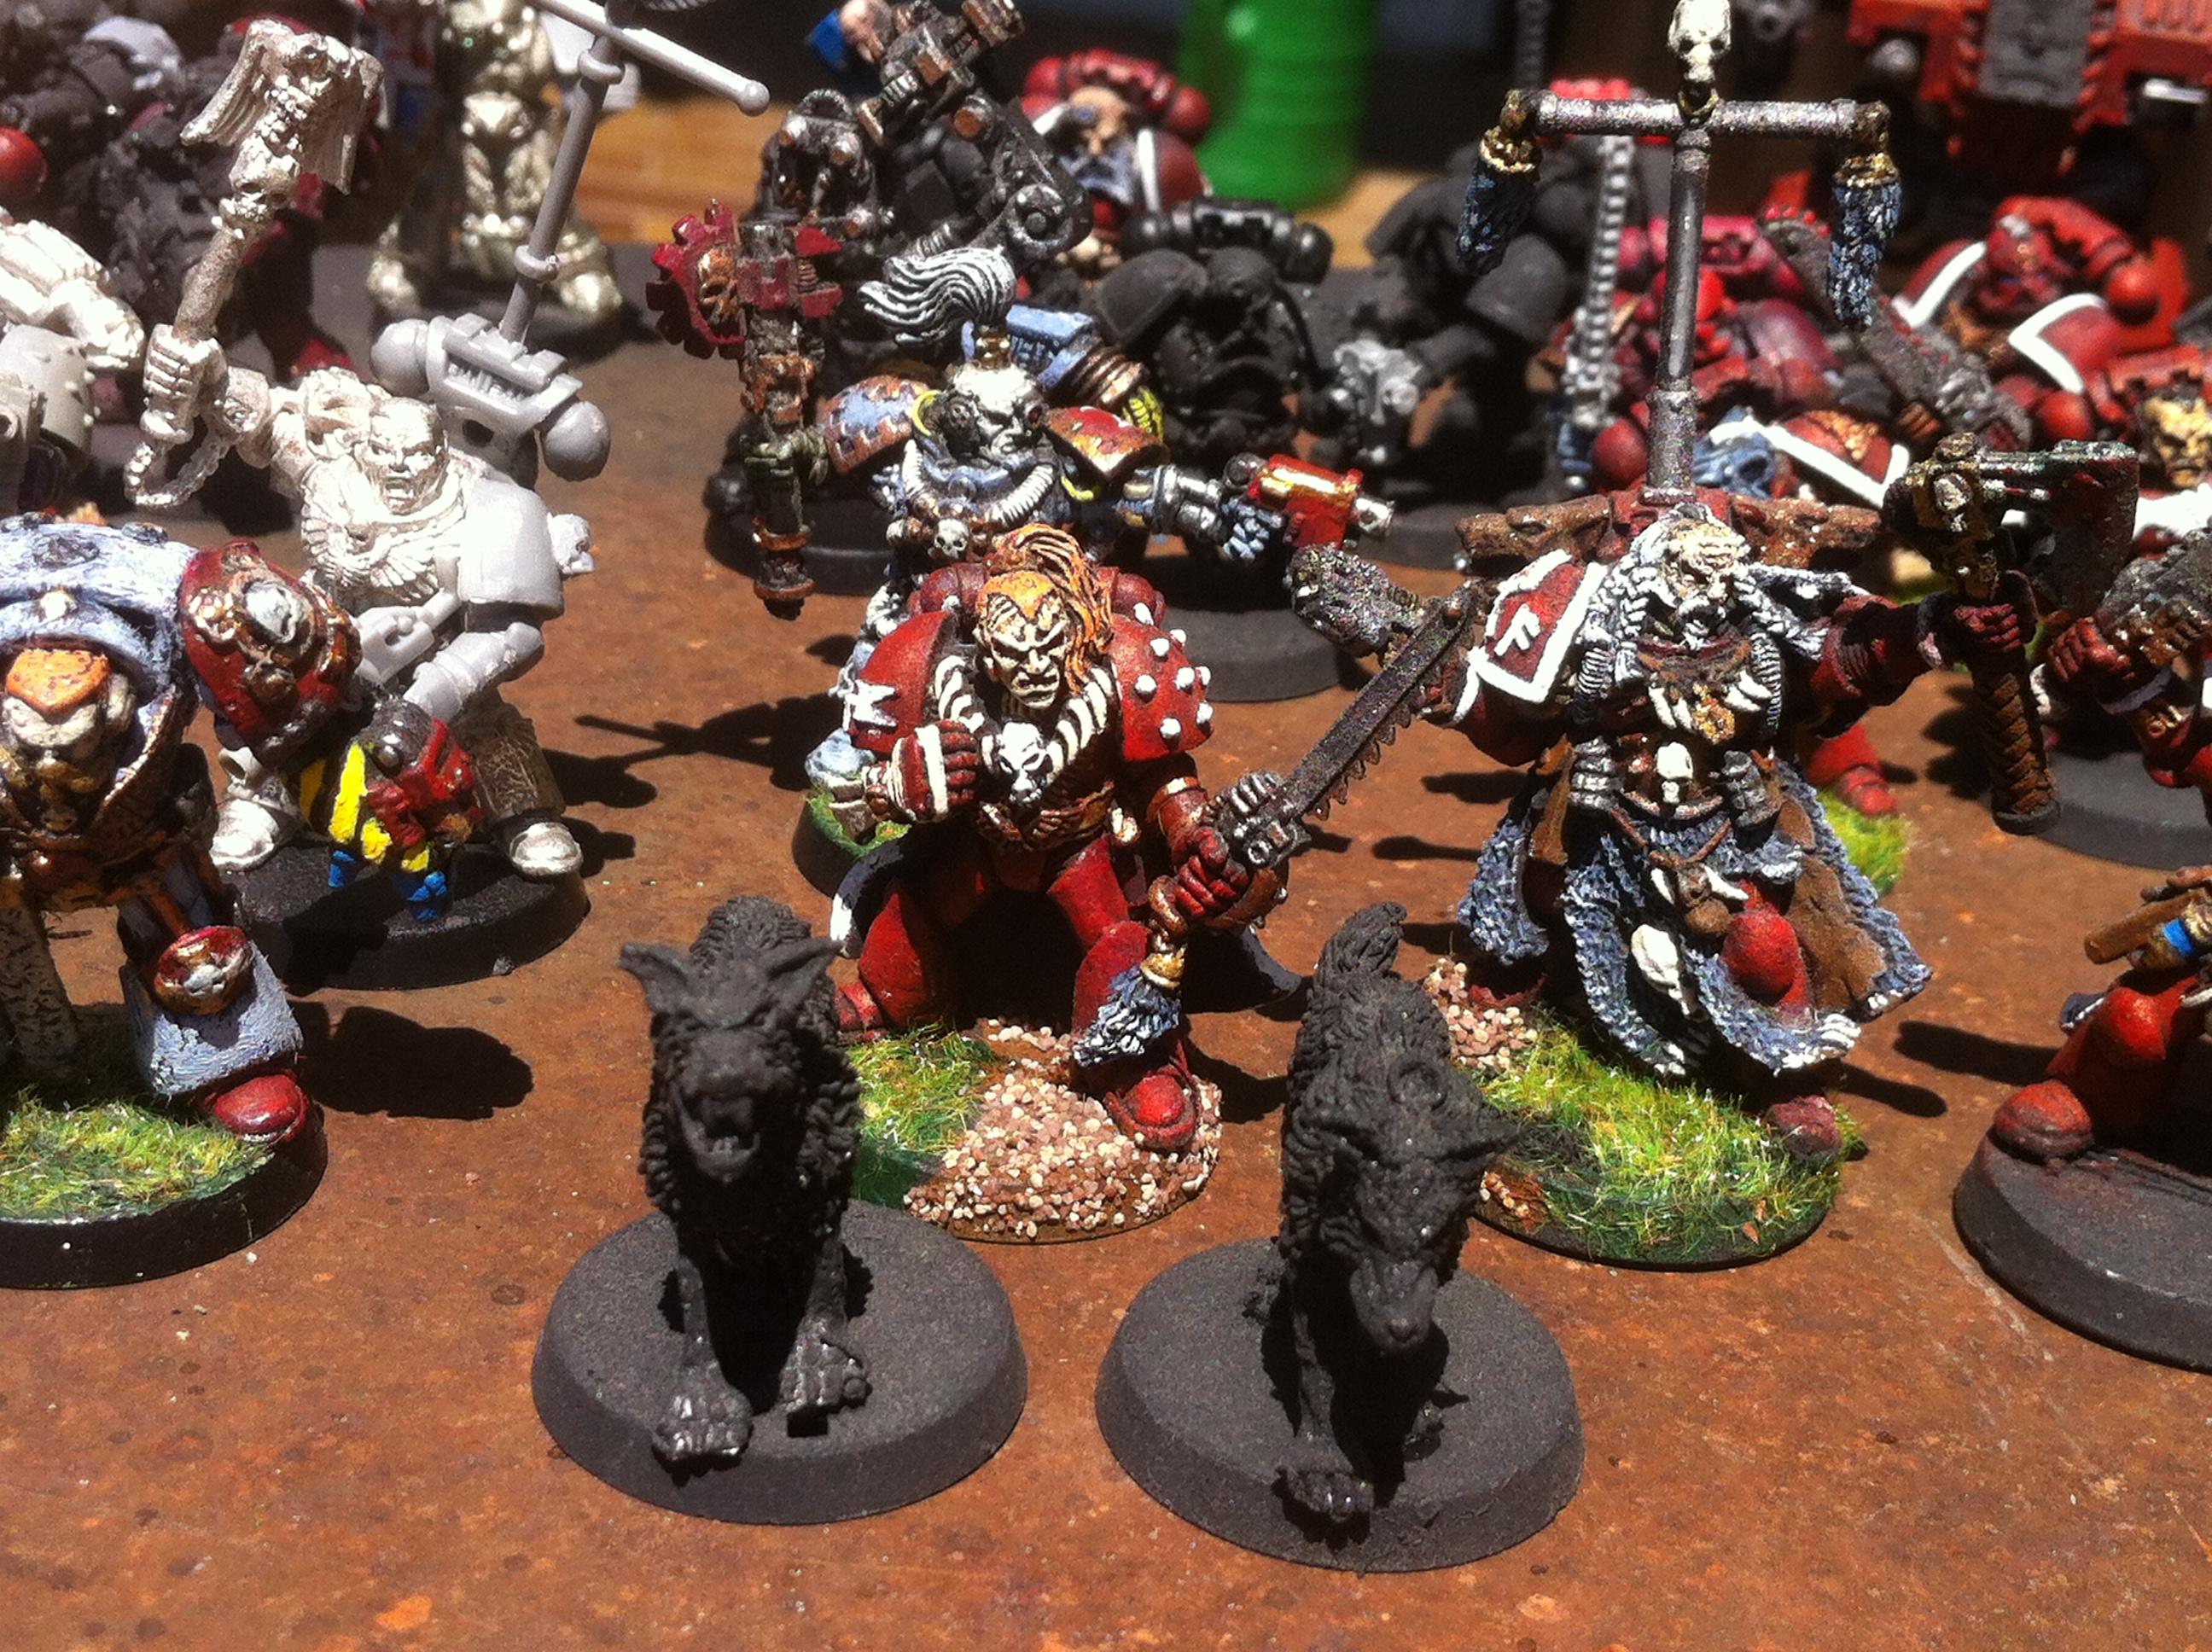 Conversion, Crazy, Dreadnought, Hands, Ih, Iron, Mad, Old, Oldhammer, Parts, Red, Sarkophagus, School, Scratch, Space, Space Marines, Wolfbrothers, Wolves